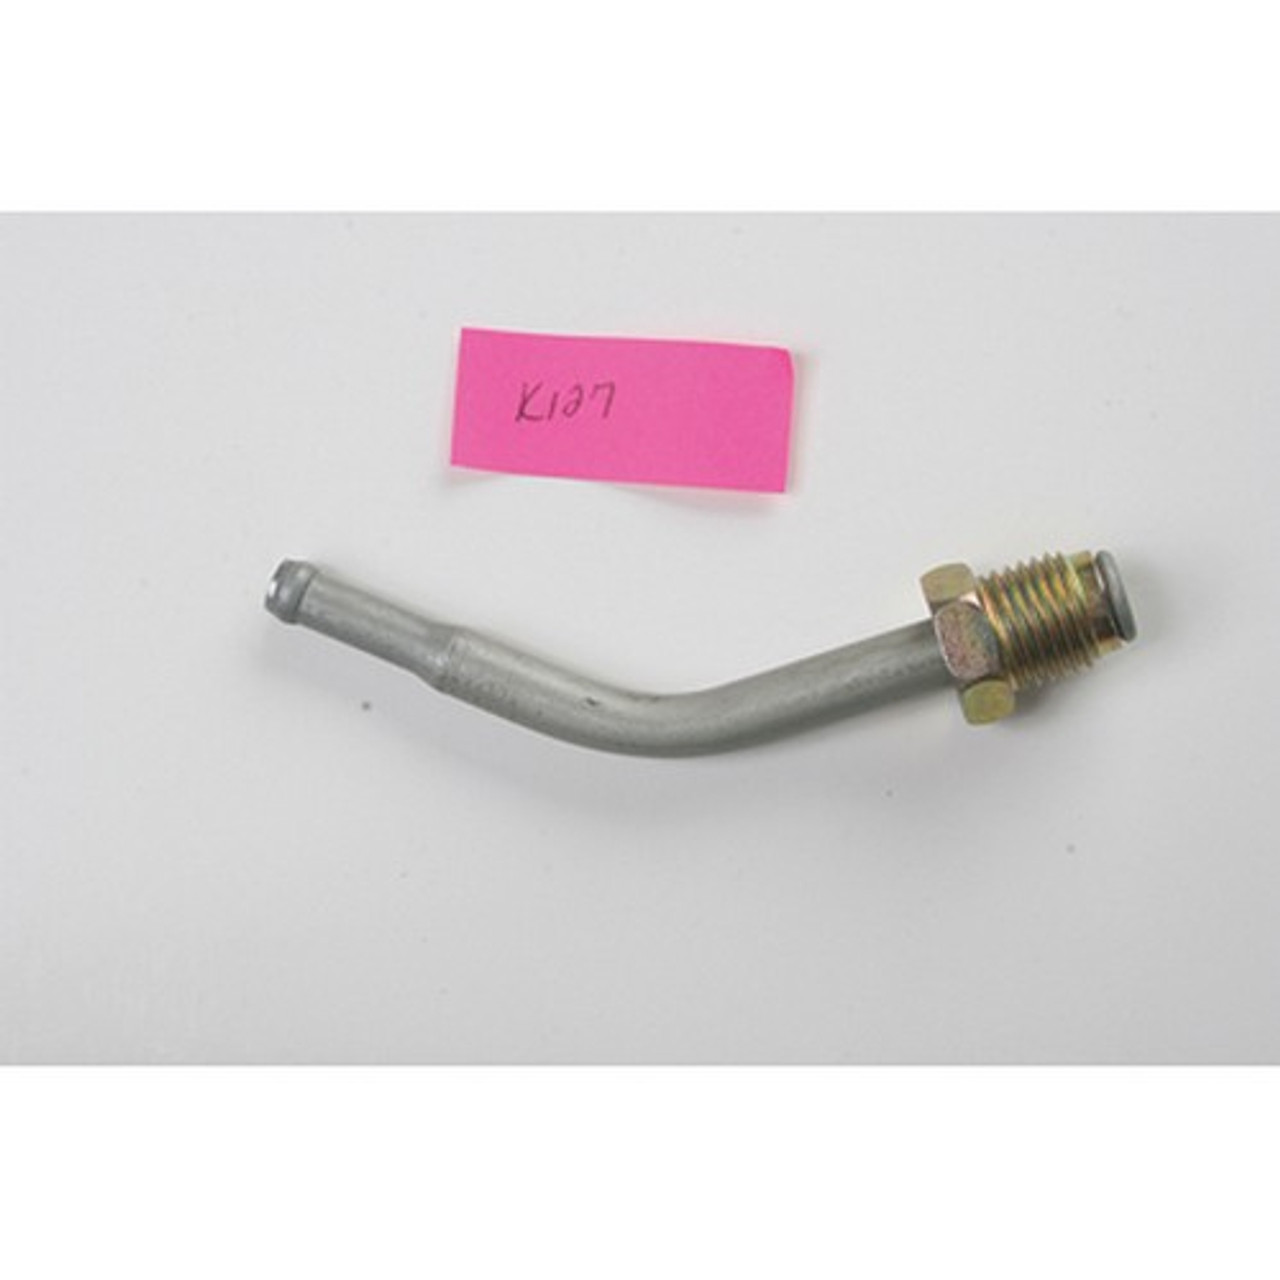 Compression Fittings 51690 Elbow